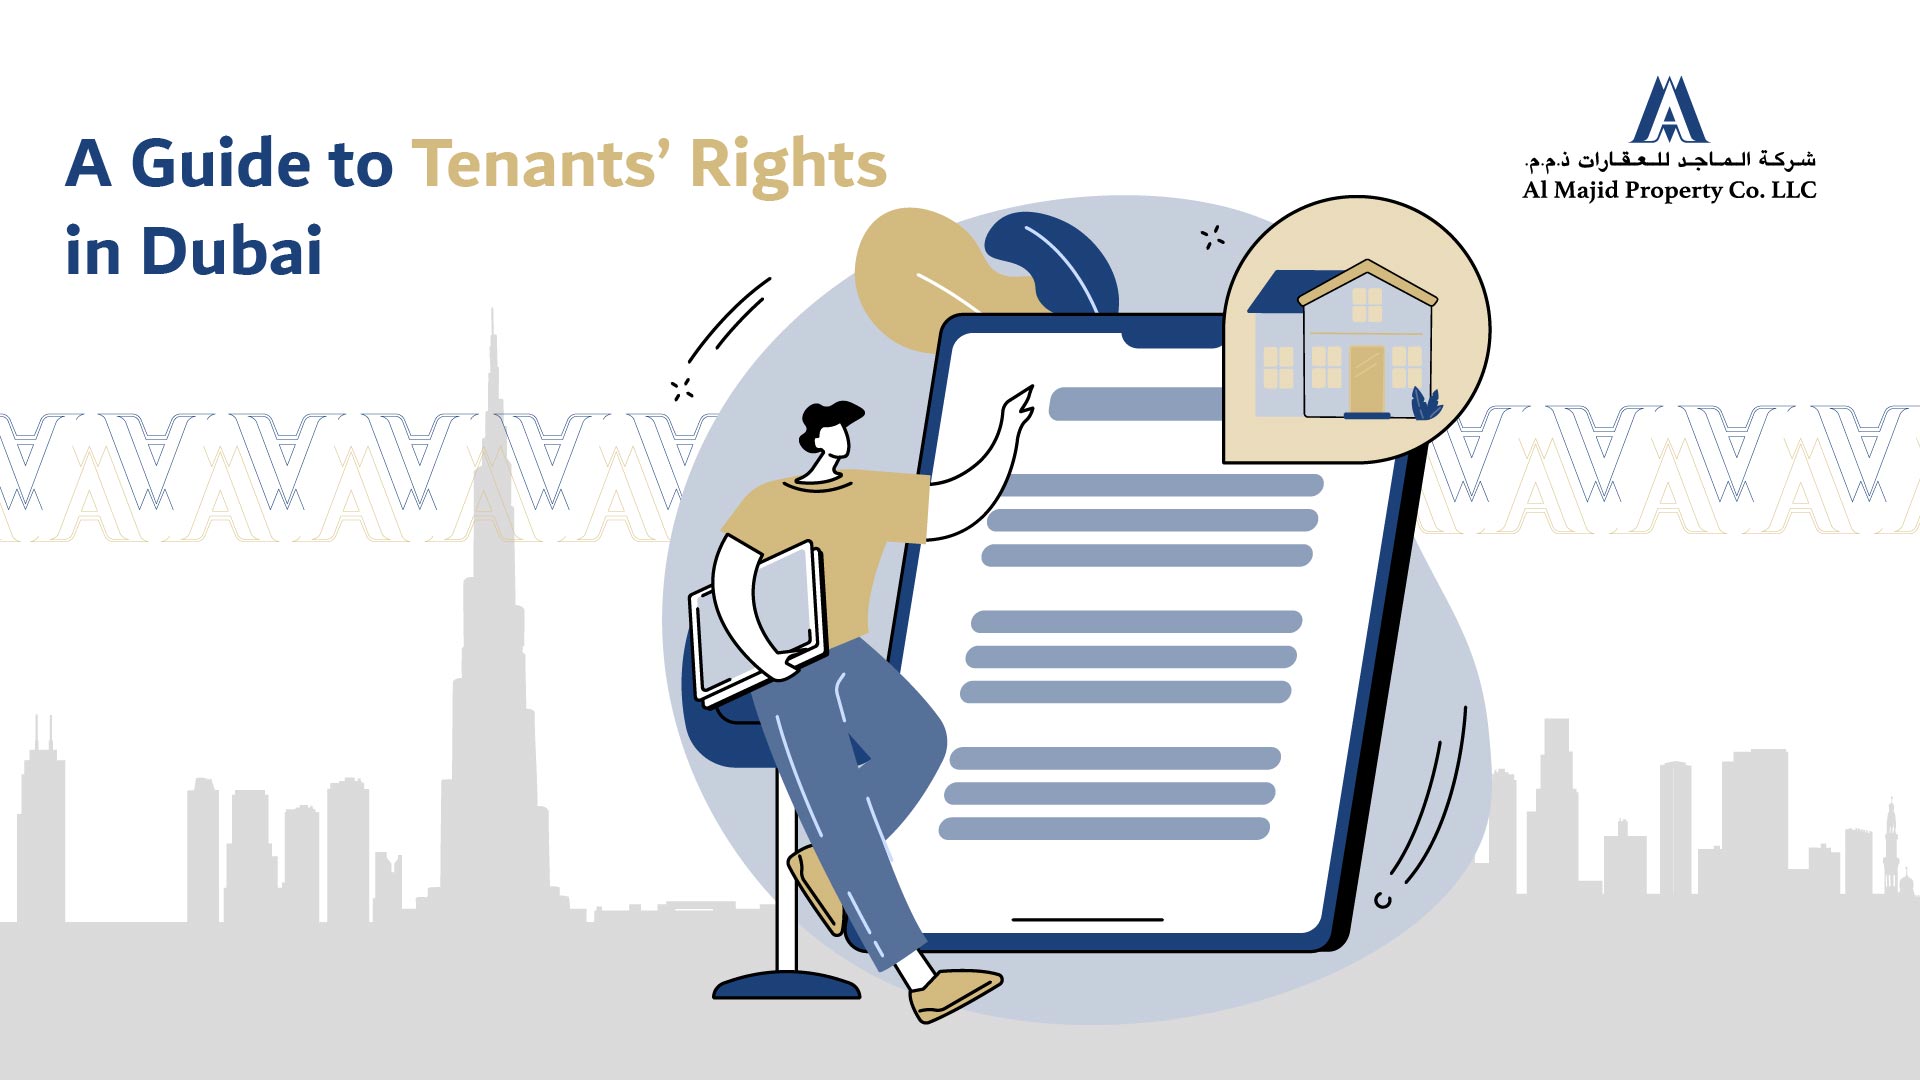 a guide to tenants’ rights in Dubai